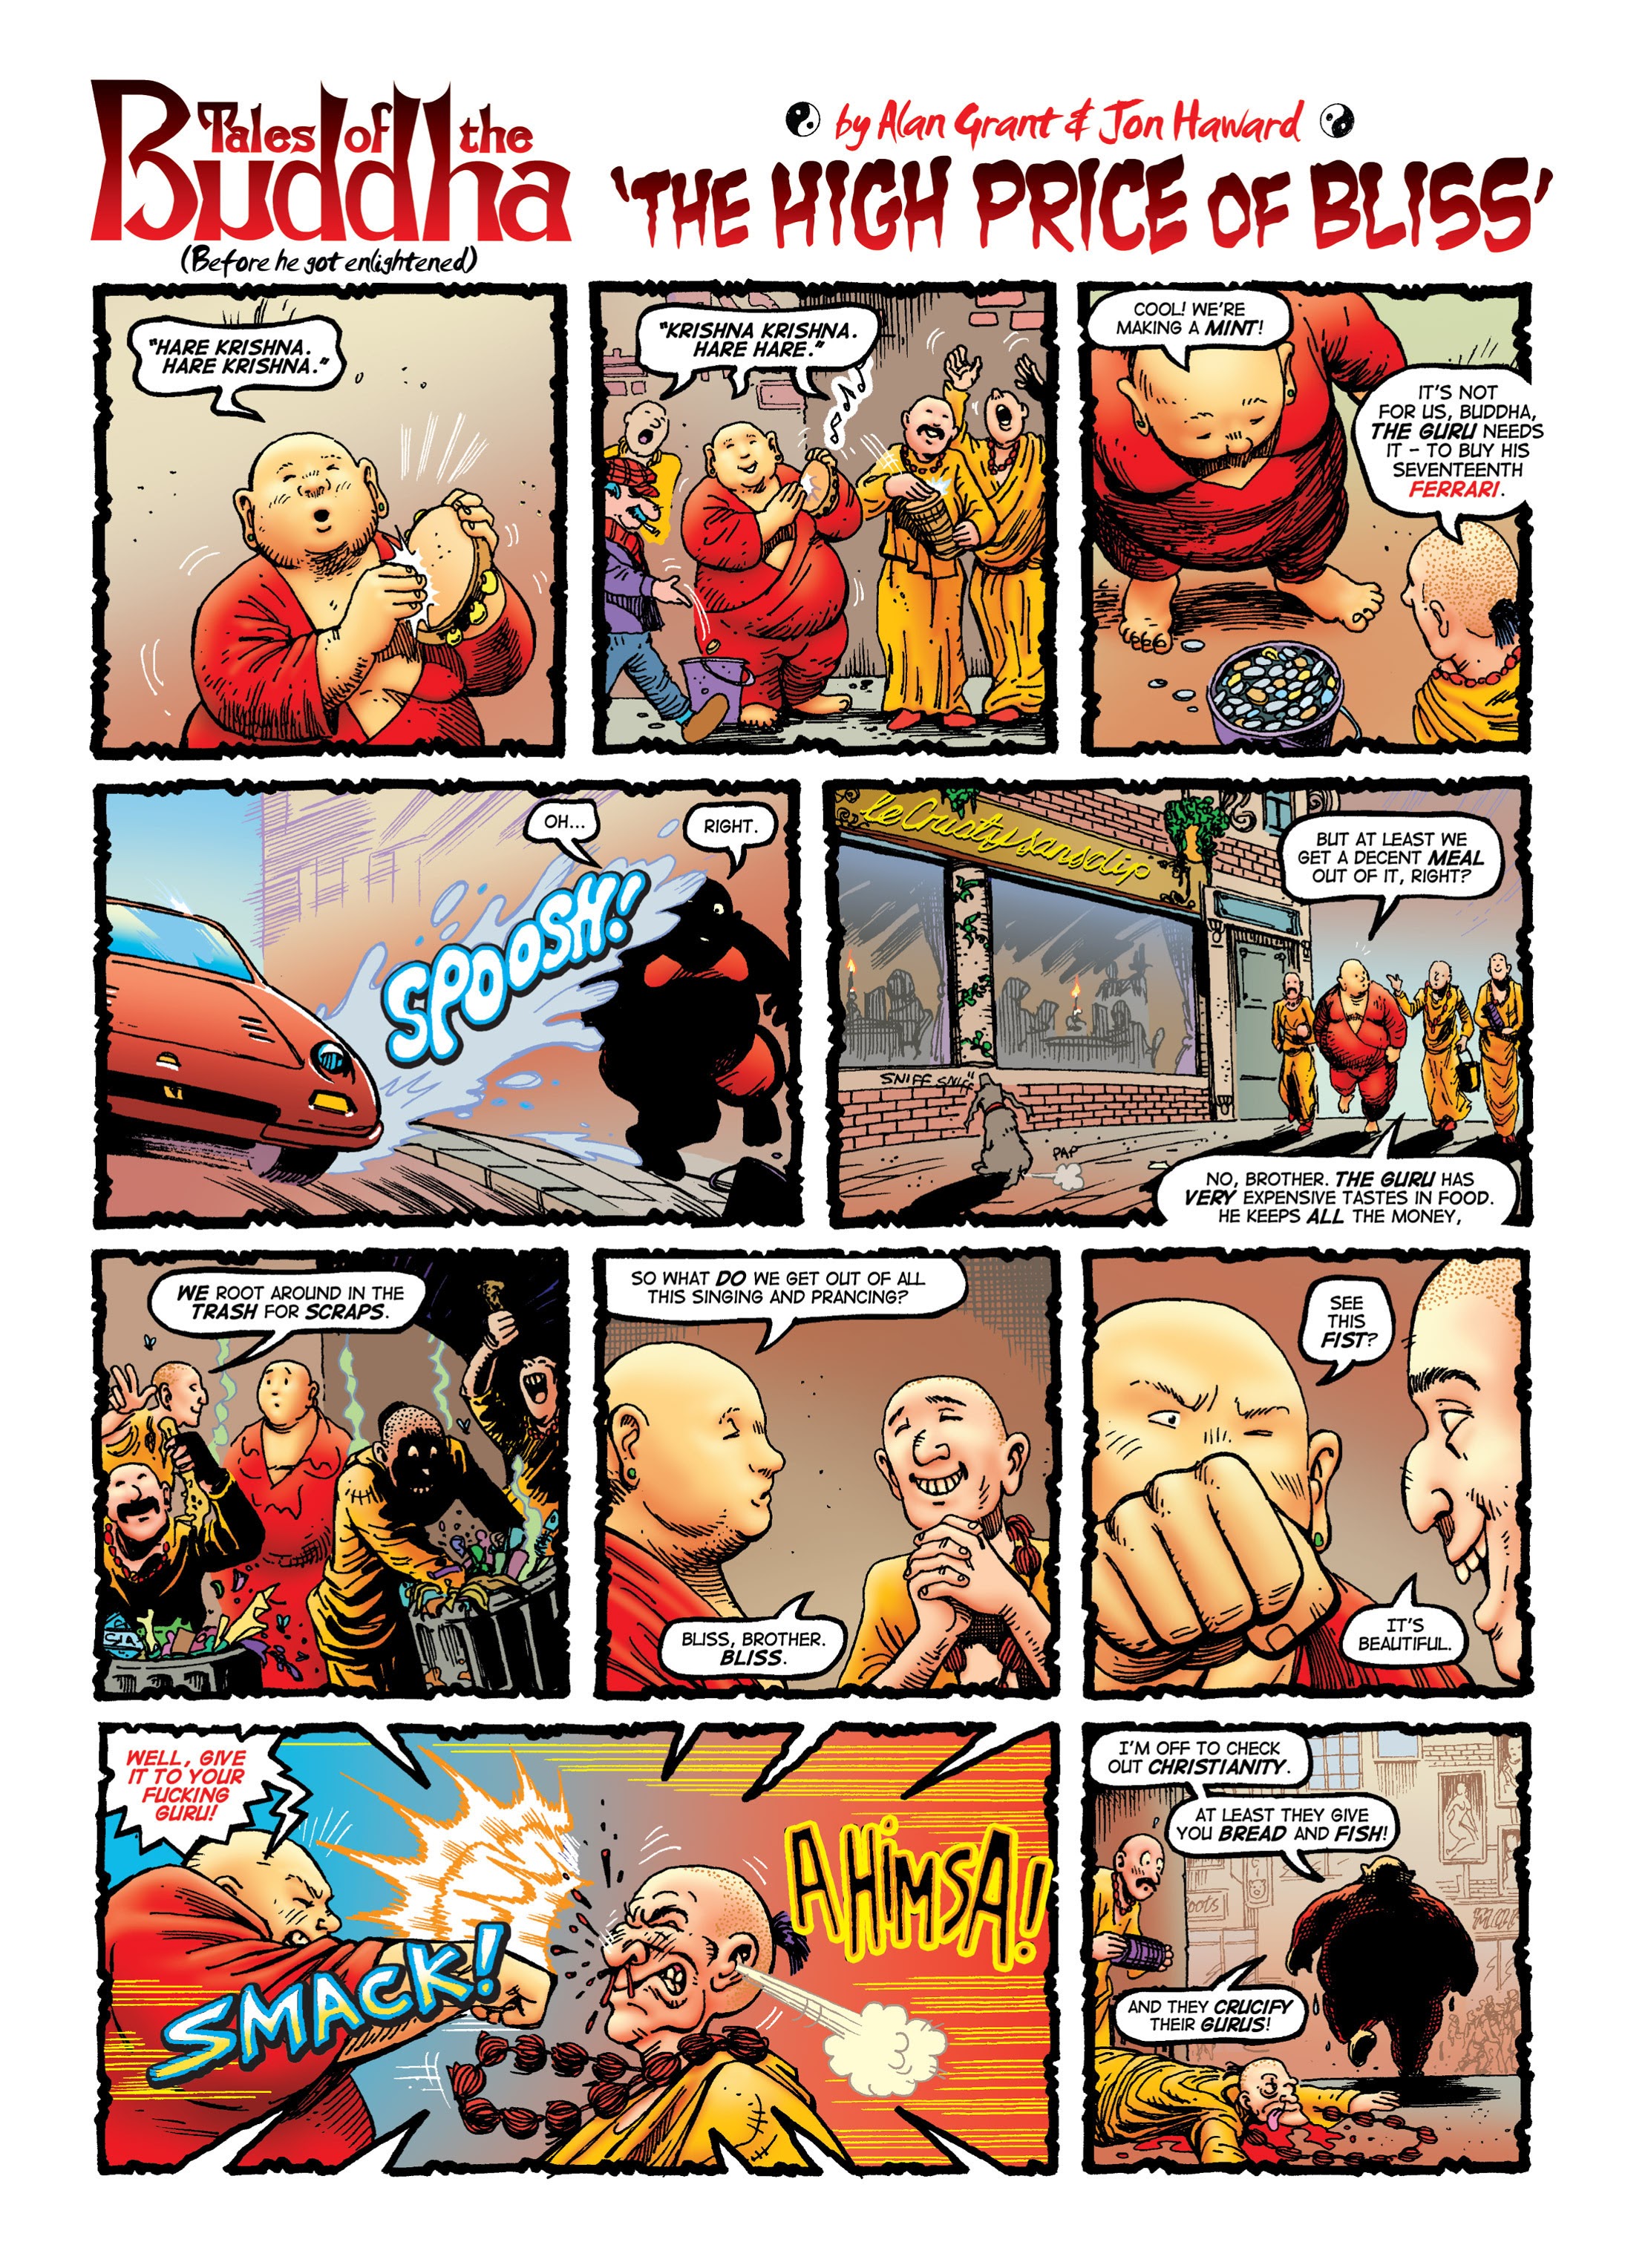 Read online Tales of the Buddha Before He Was Enlightened comic -  Issue # Full - 5